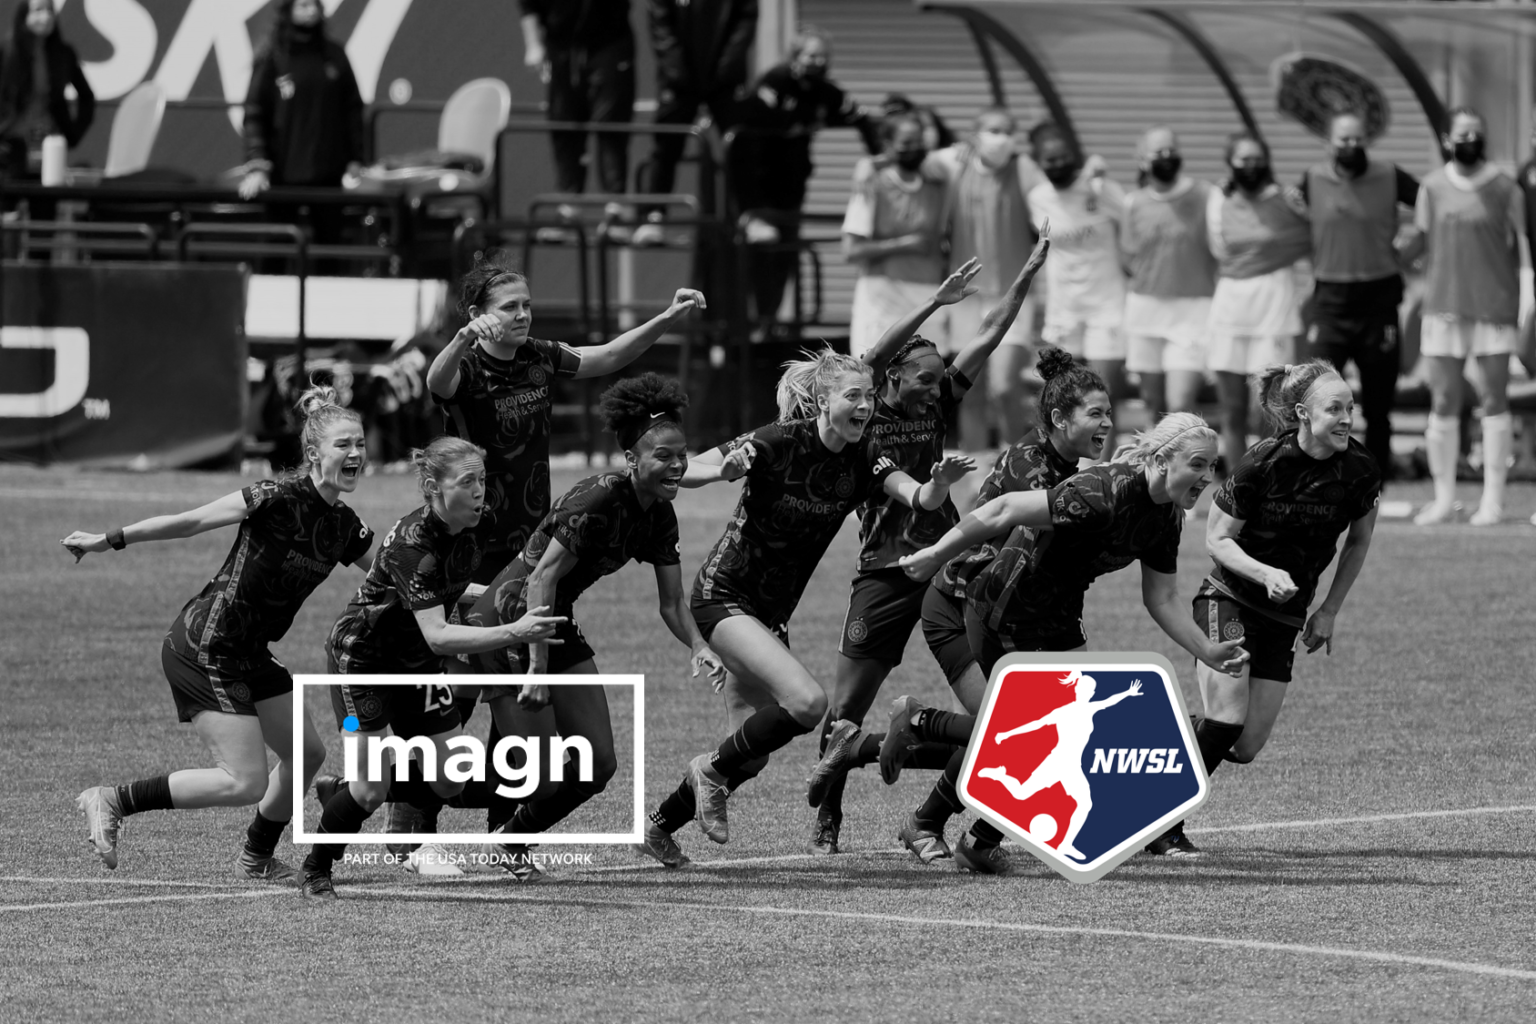 Imagn and National Women’s Soccer League Announce Worldwide Official Photography Agreement